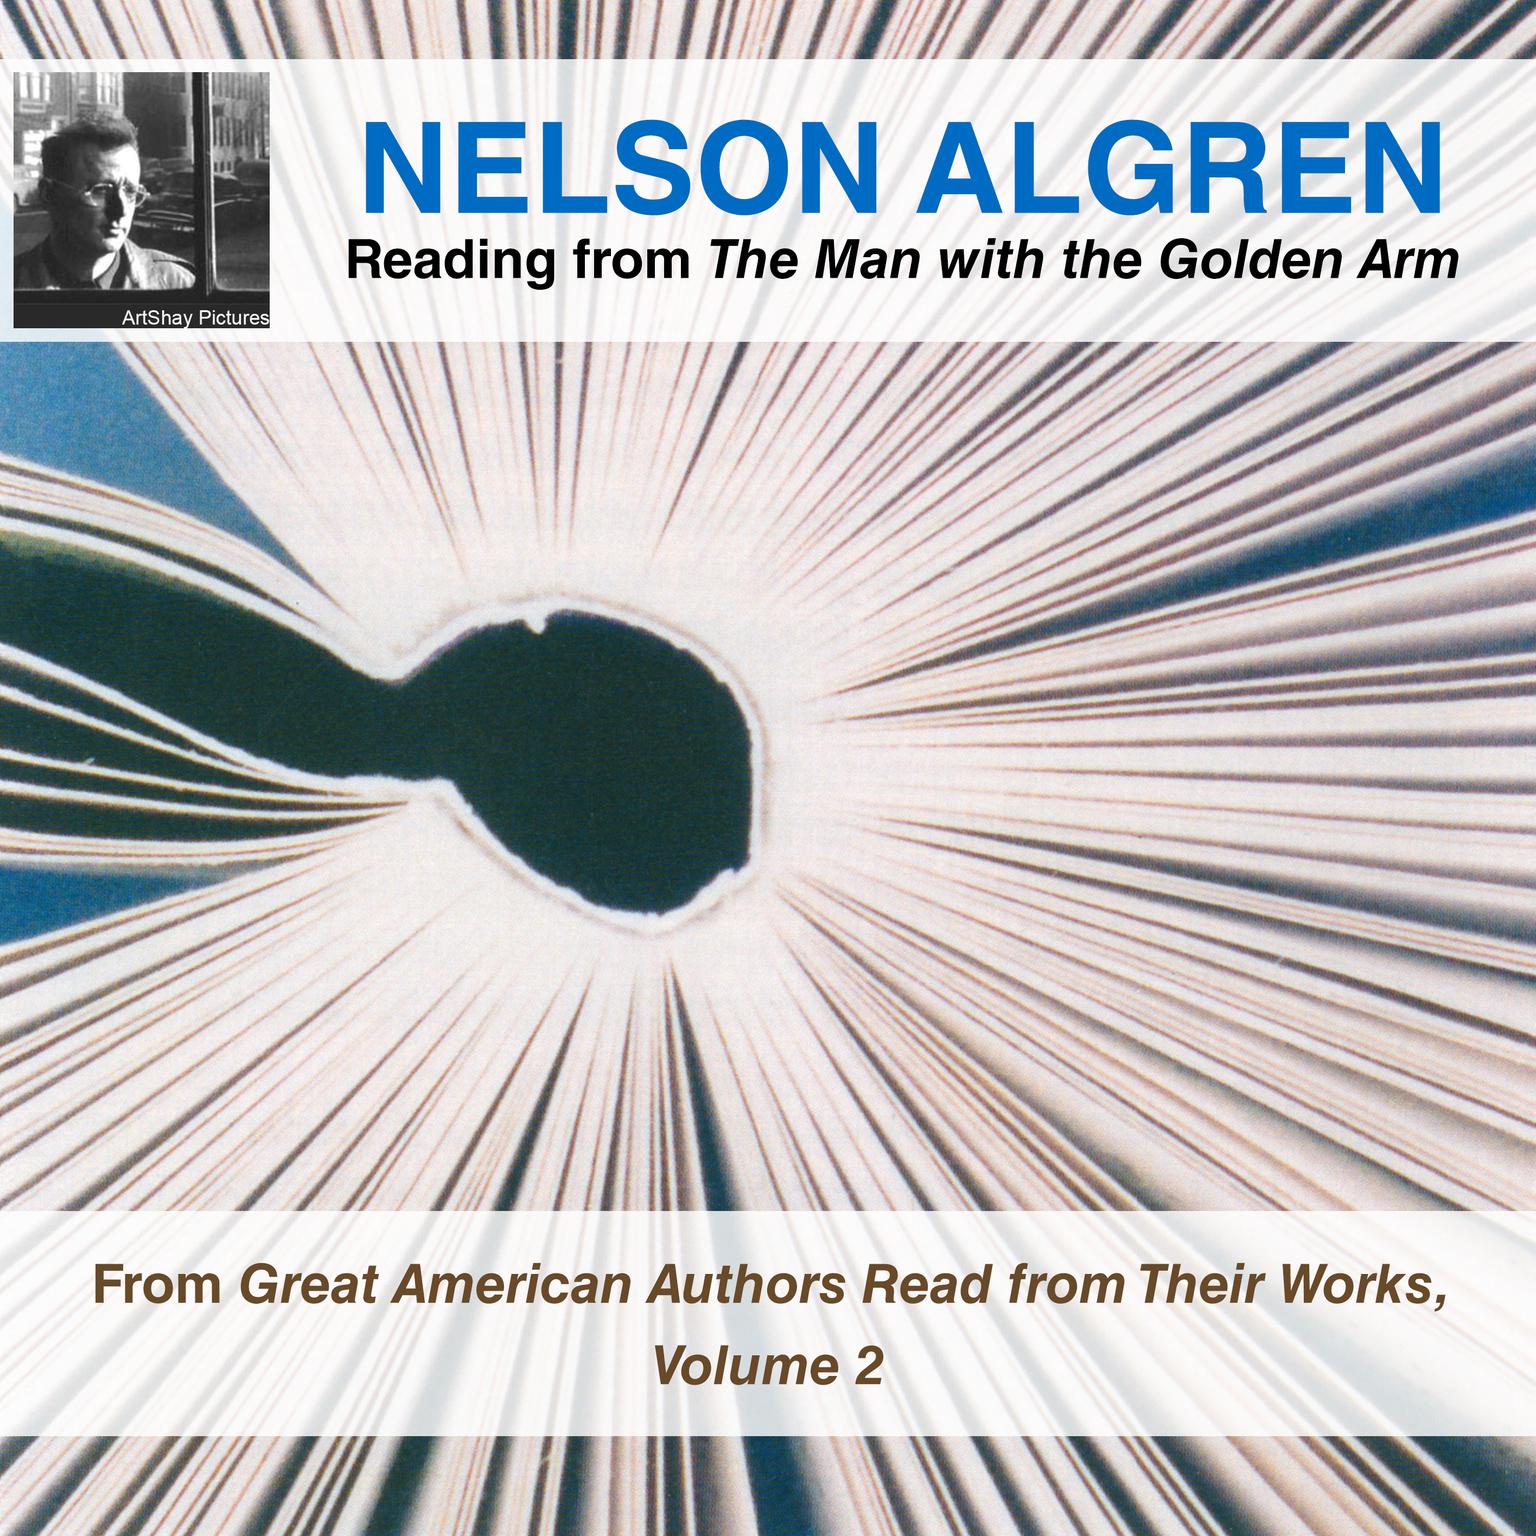 Nelson Algren Reading from The Man with the Golden Arm: From Great American Authors Read from Their Works, Volume 2 Audiobook, by Nelson Algren